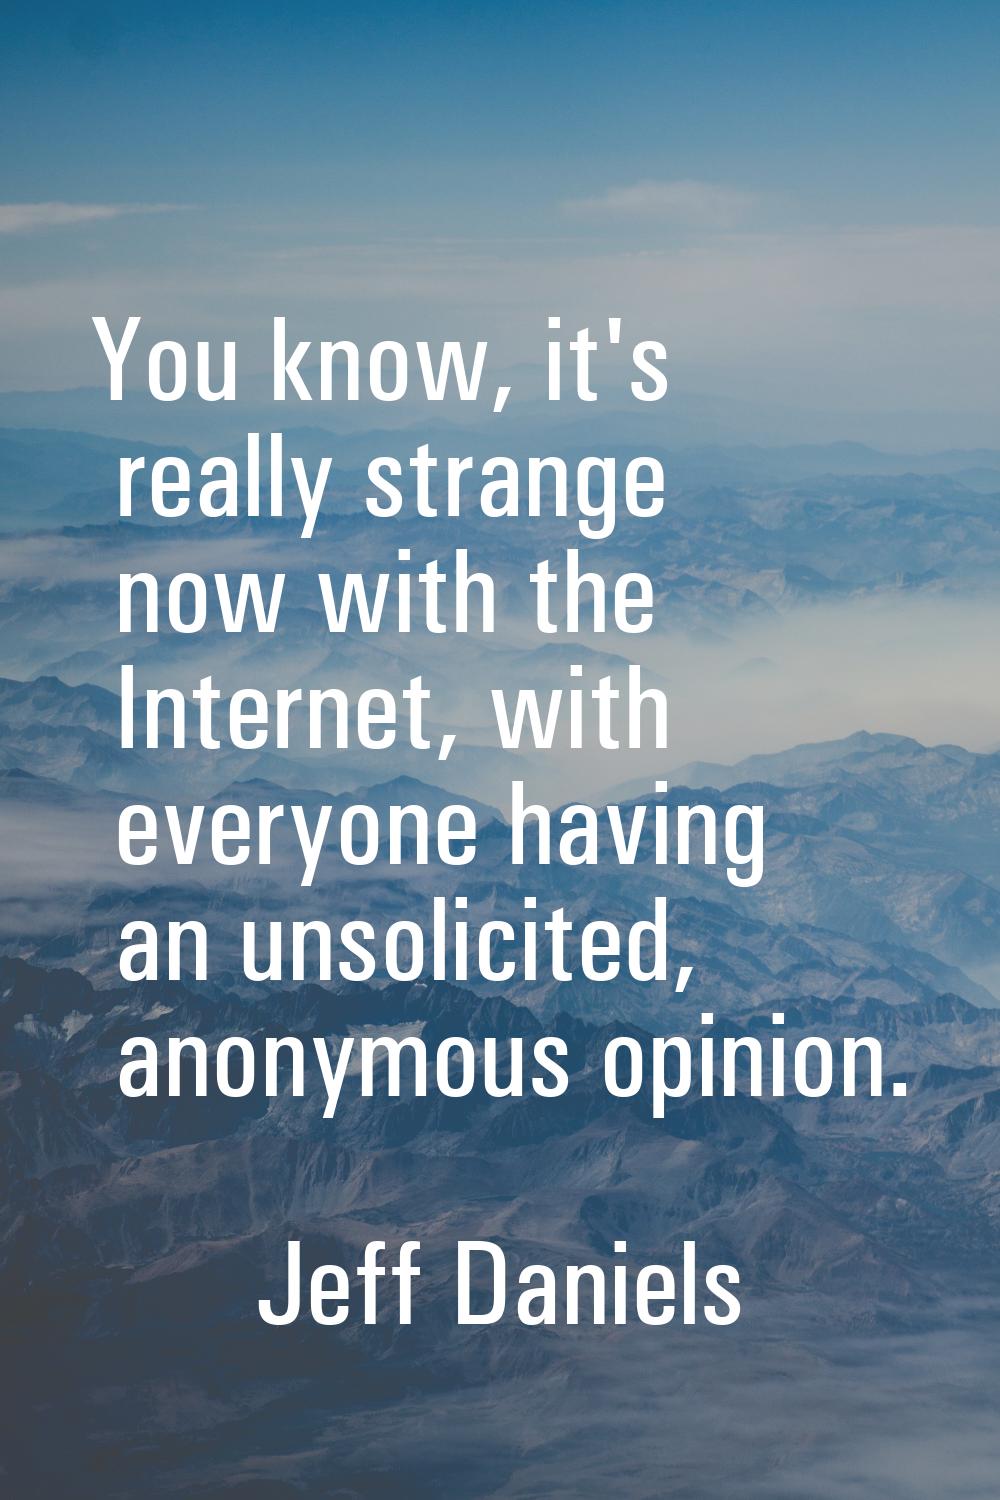 You know, it's really strange now with the Internet, with everyone having an unsolicited, anonymous